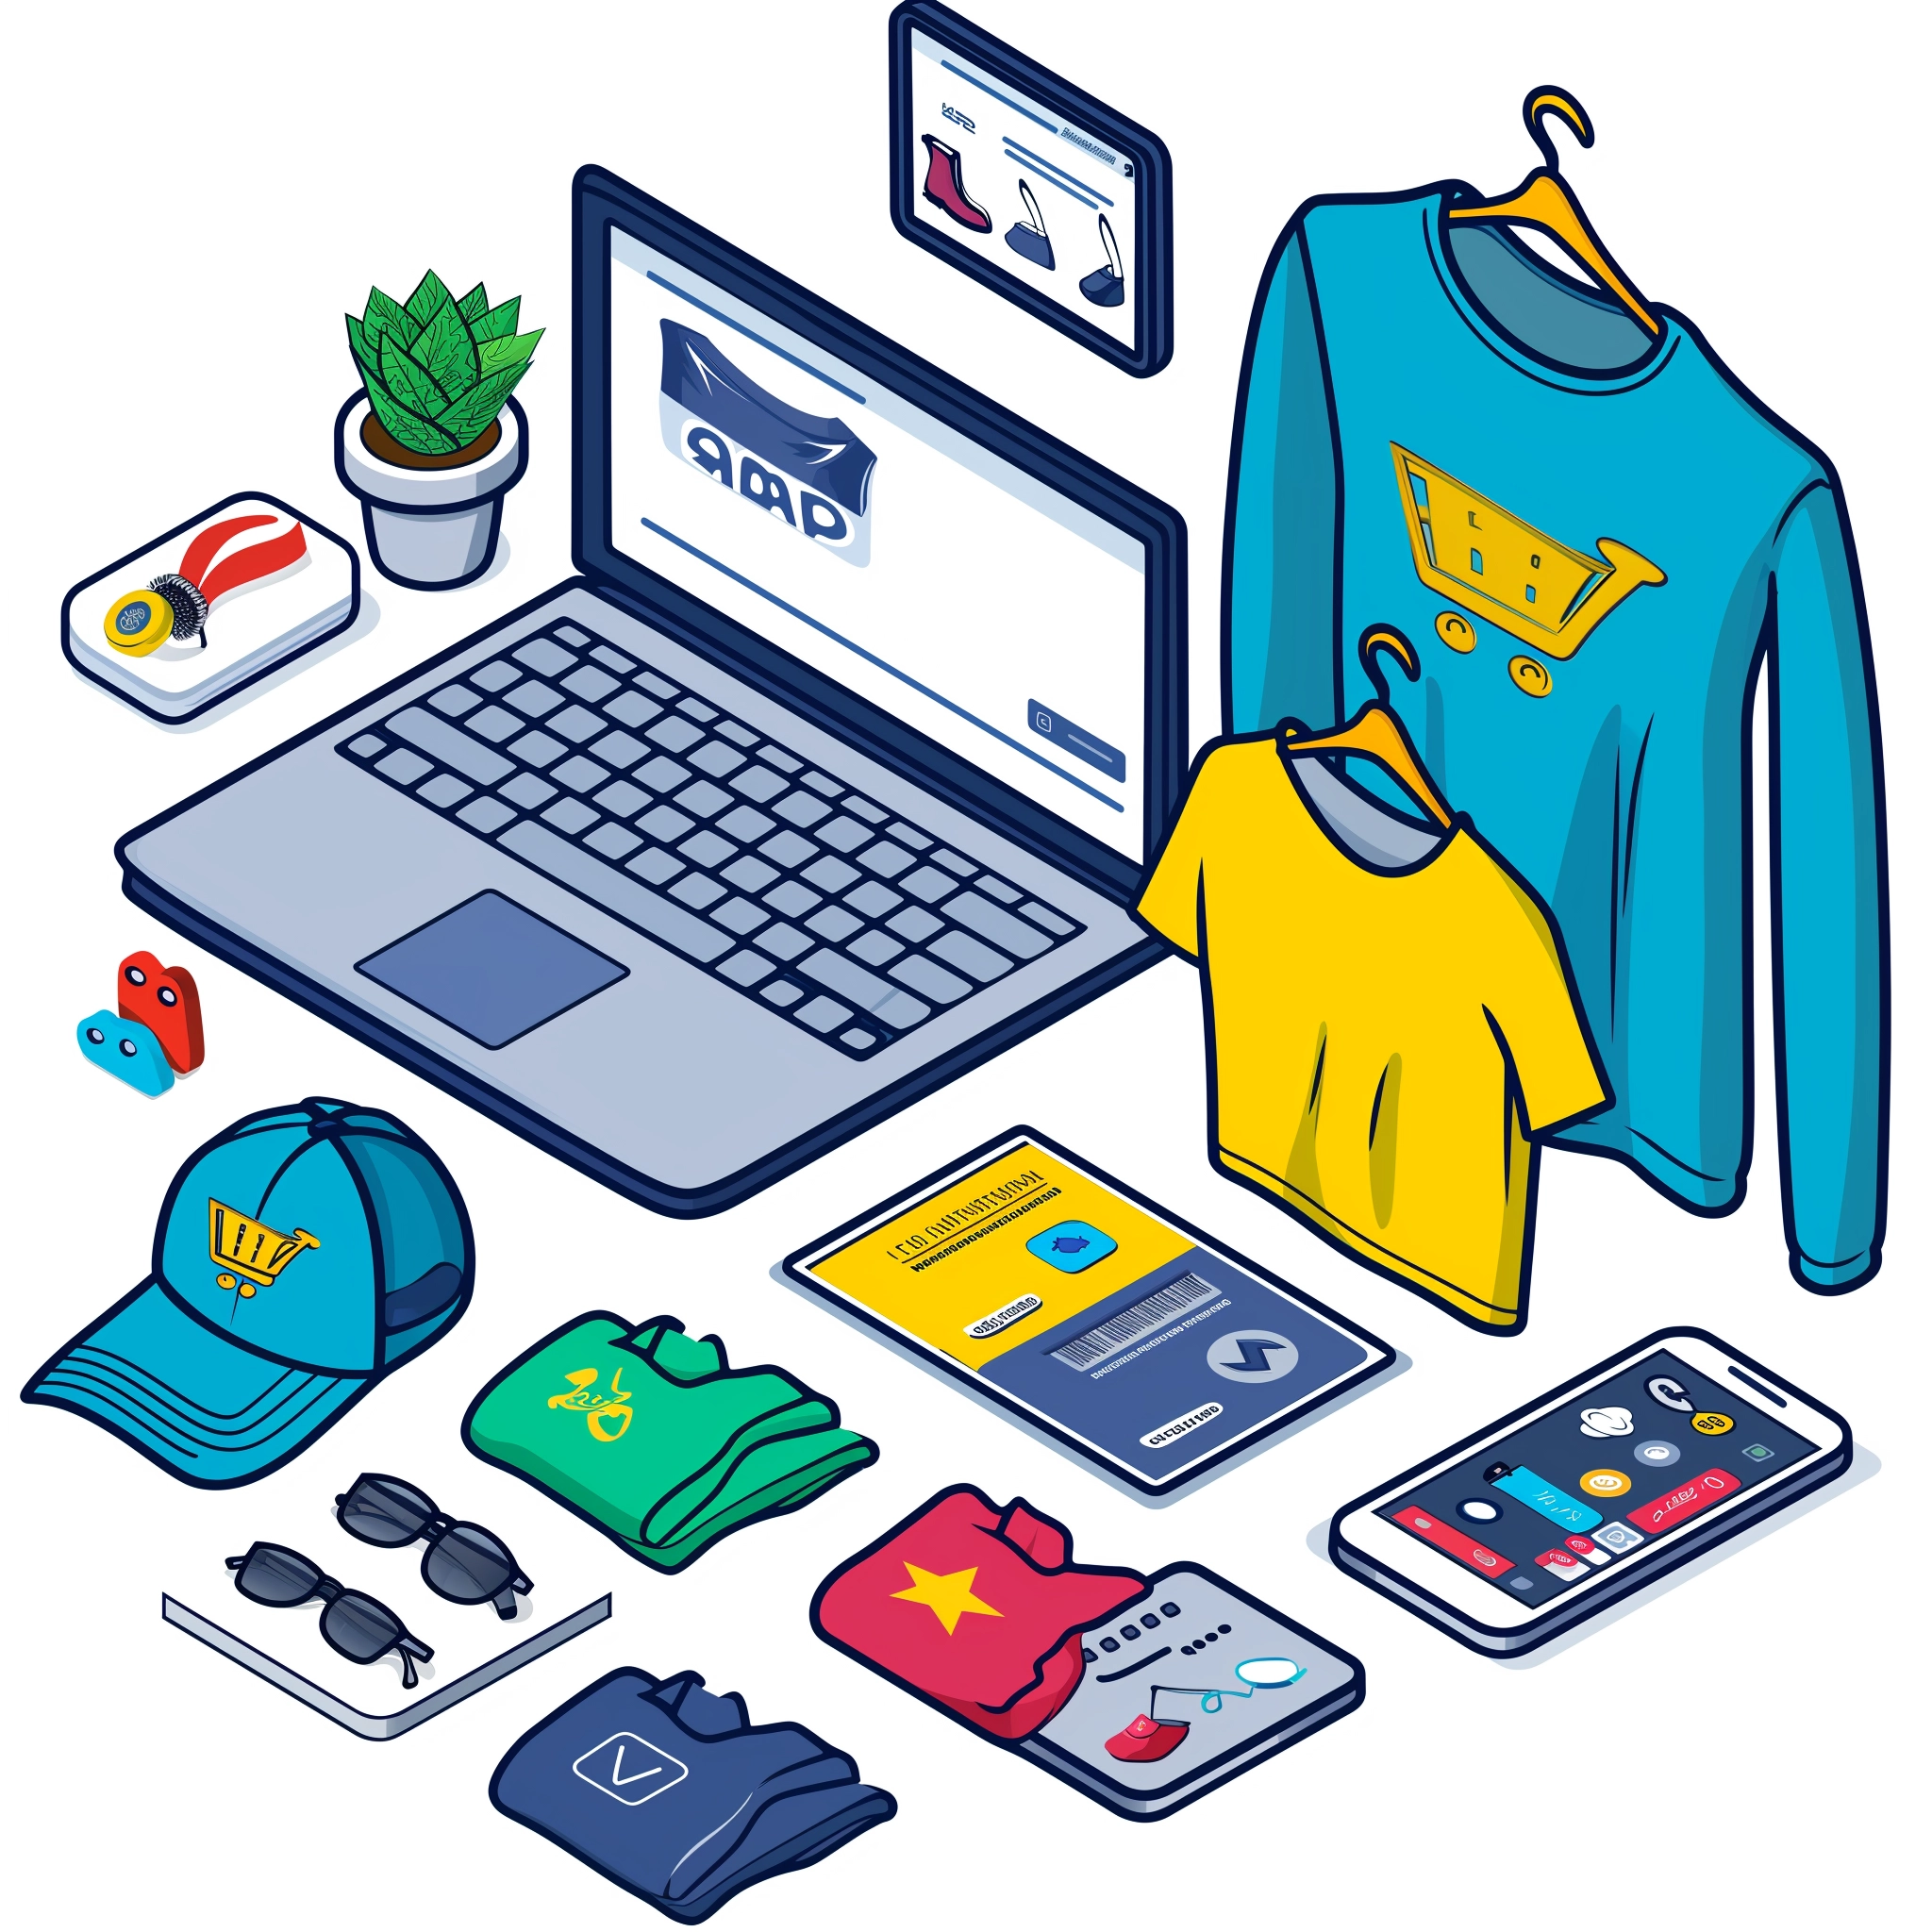 Illustration of an array of branded merchandise including clothing, electronics, and accessories surrounding an open laptop with an online store on the screen.